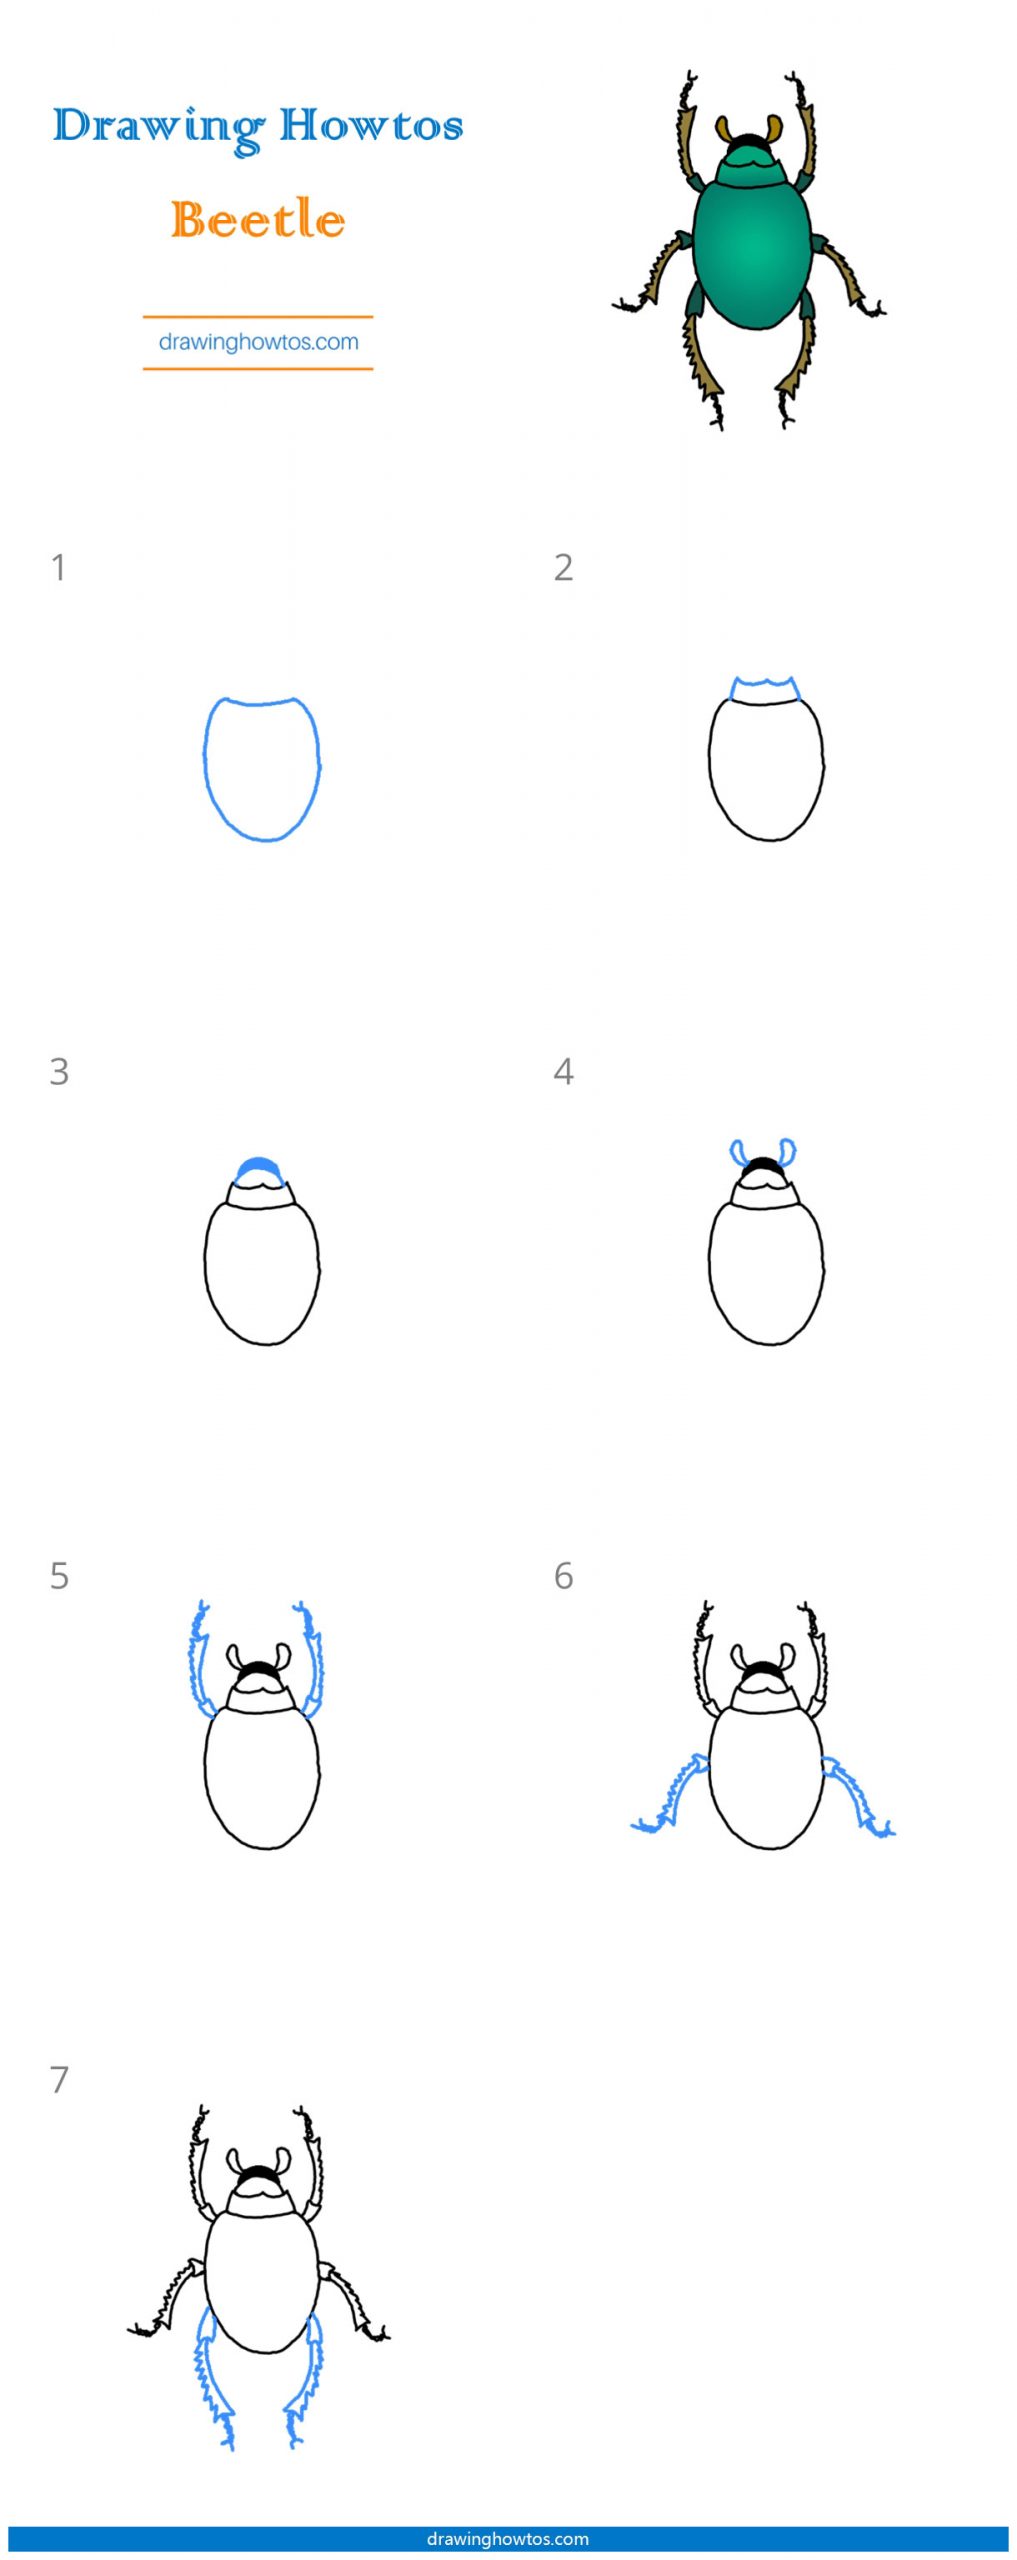 How to Draw a Beetle Step by Step